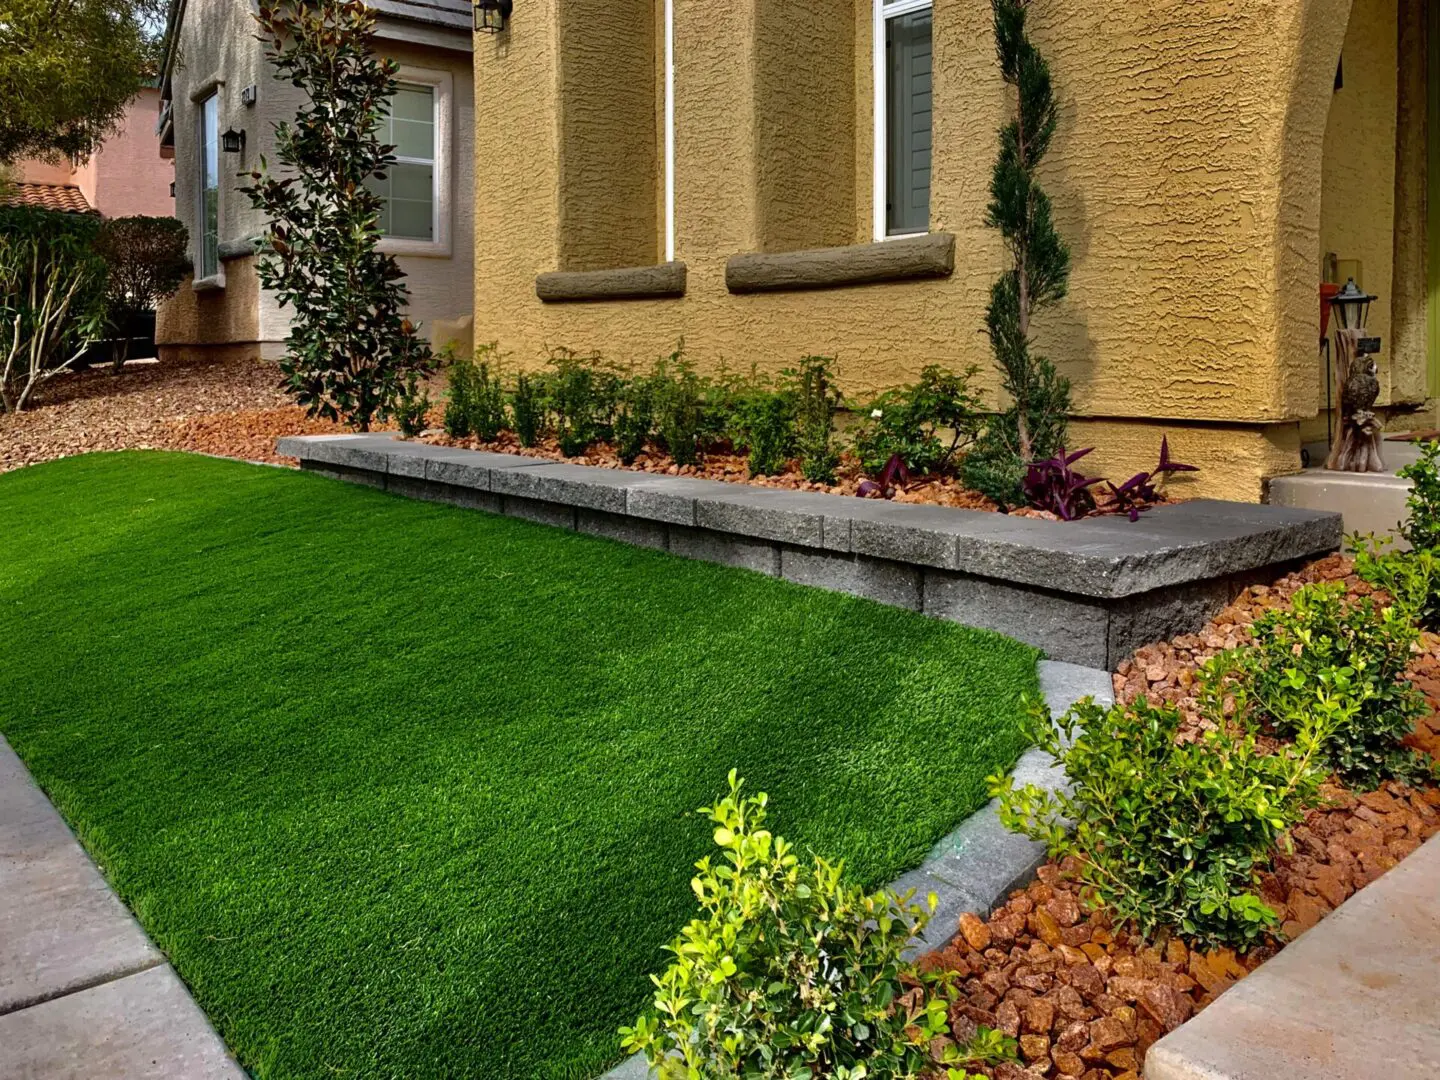 A green lawn in front of a house.